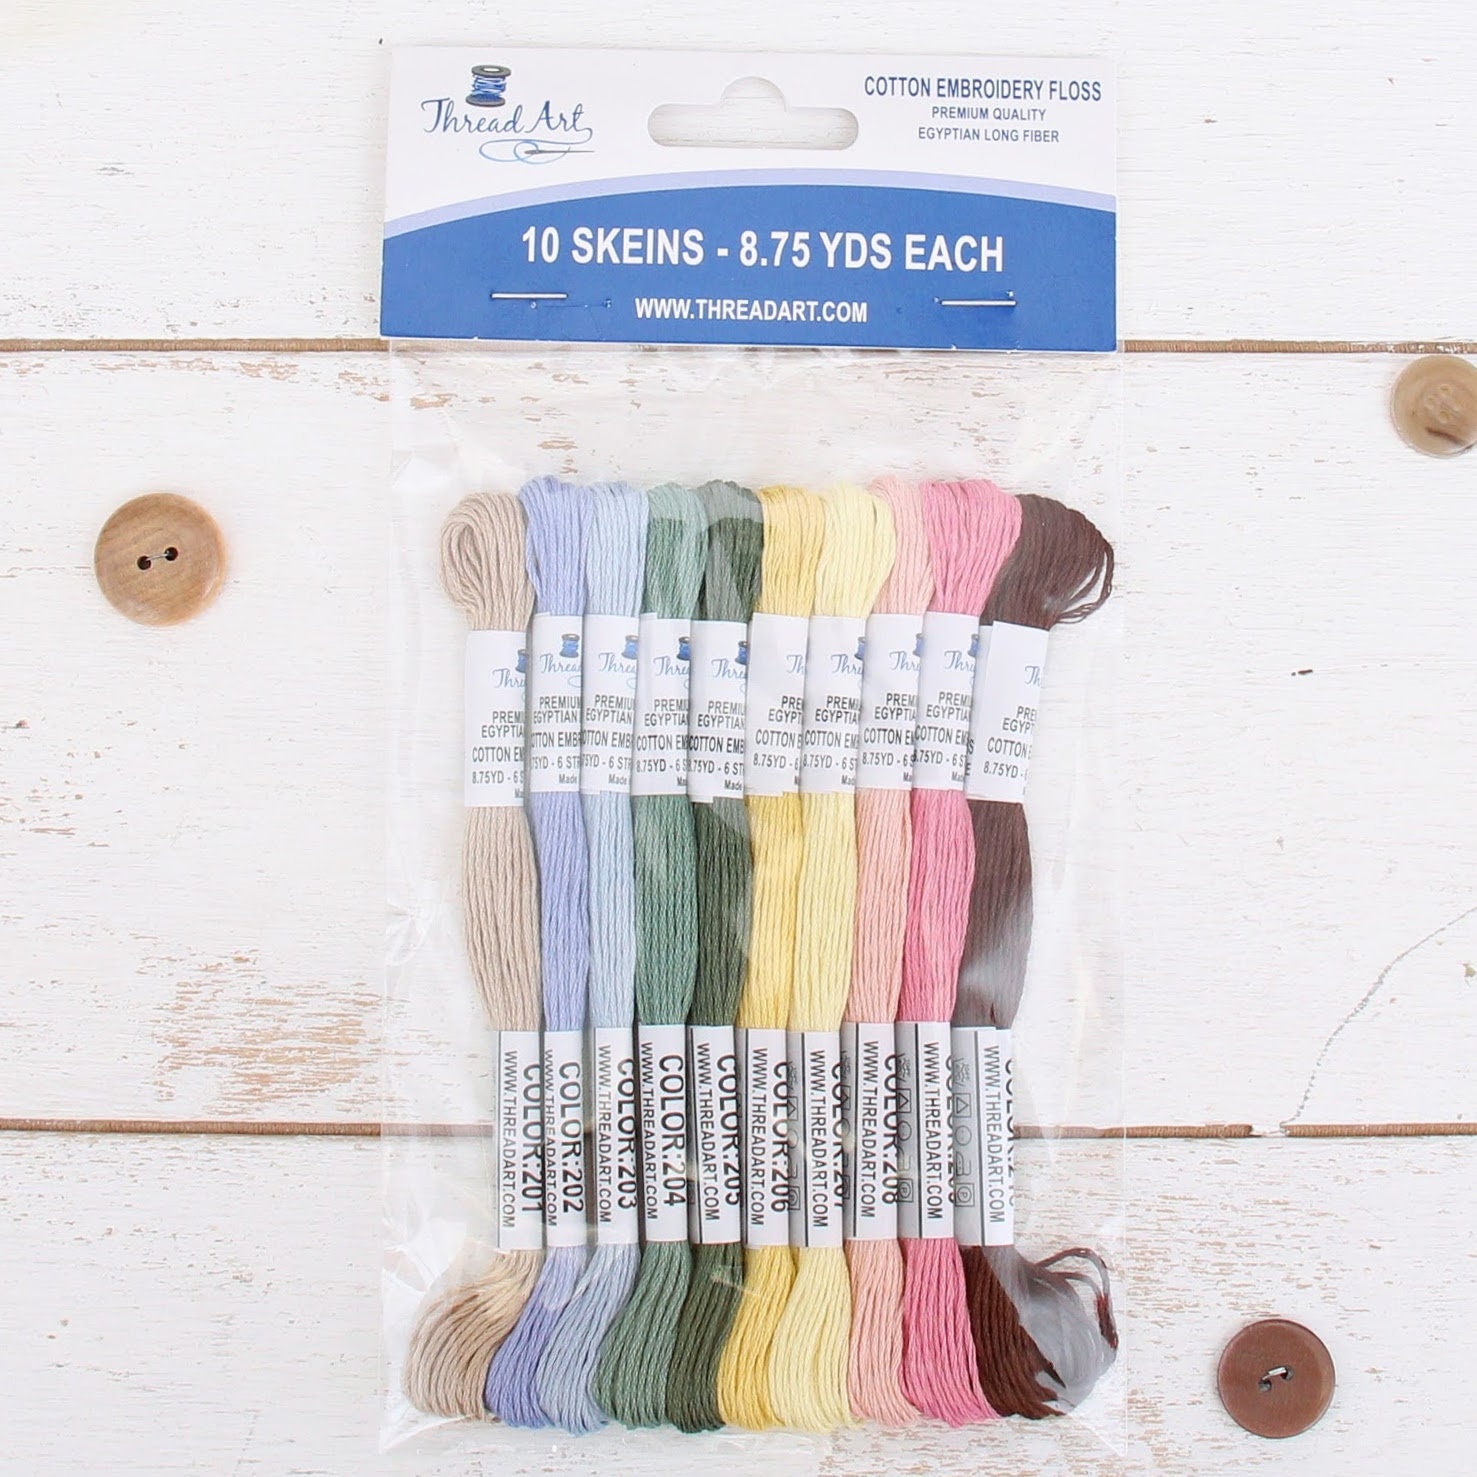 12 Skeins ThreadArt Premium Egyptian Long Fiber Cotton Embroidery Floss |  Black | Six Strand Divisible Thread 8.75yd Skeins For Hand Embroidery